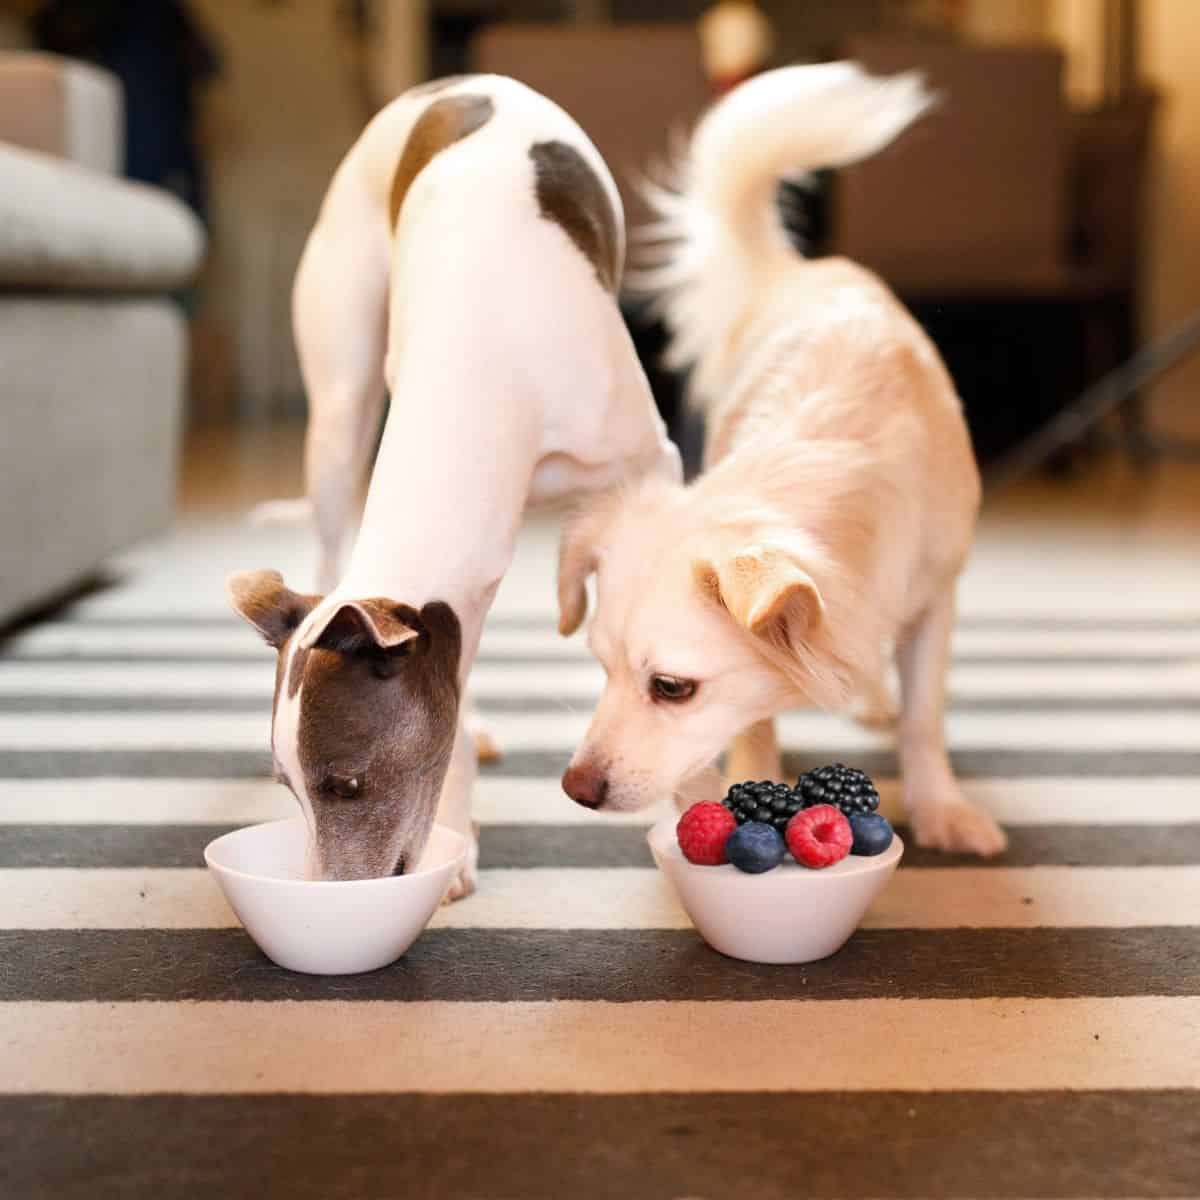 Two small dogs eating out of white bowls one eating berries.